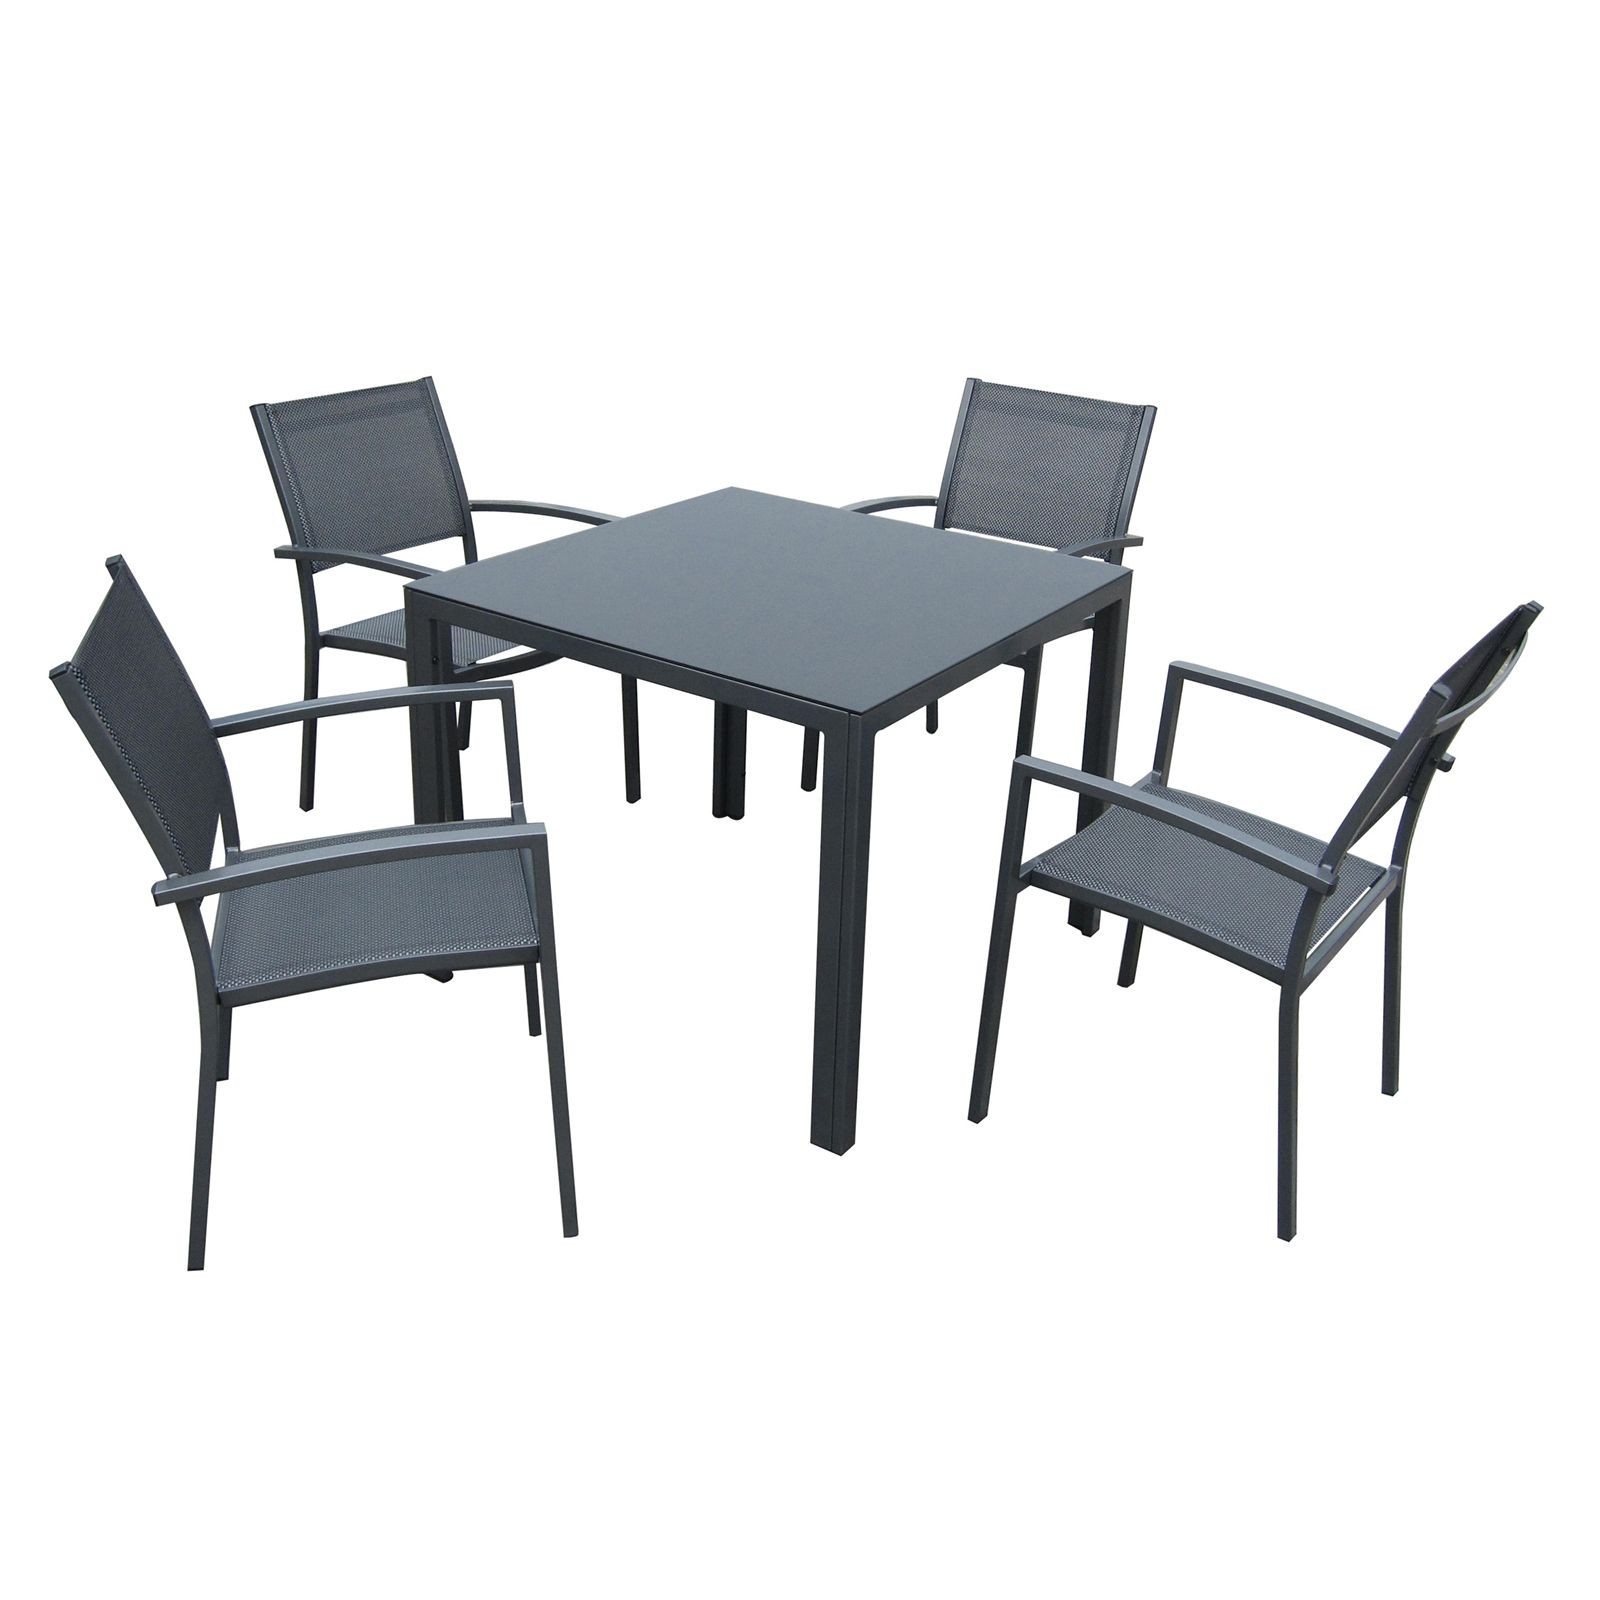 Bunnings Outdoor Furniture Chairs Off 64